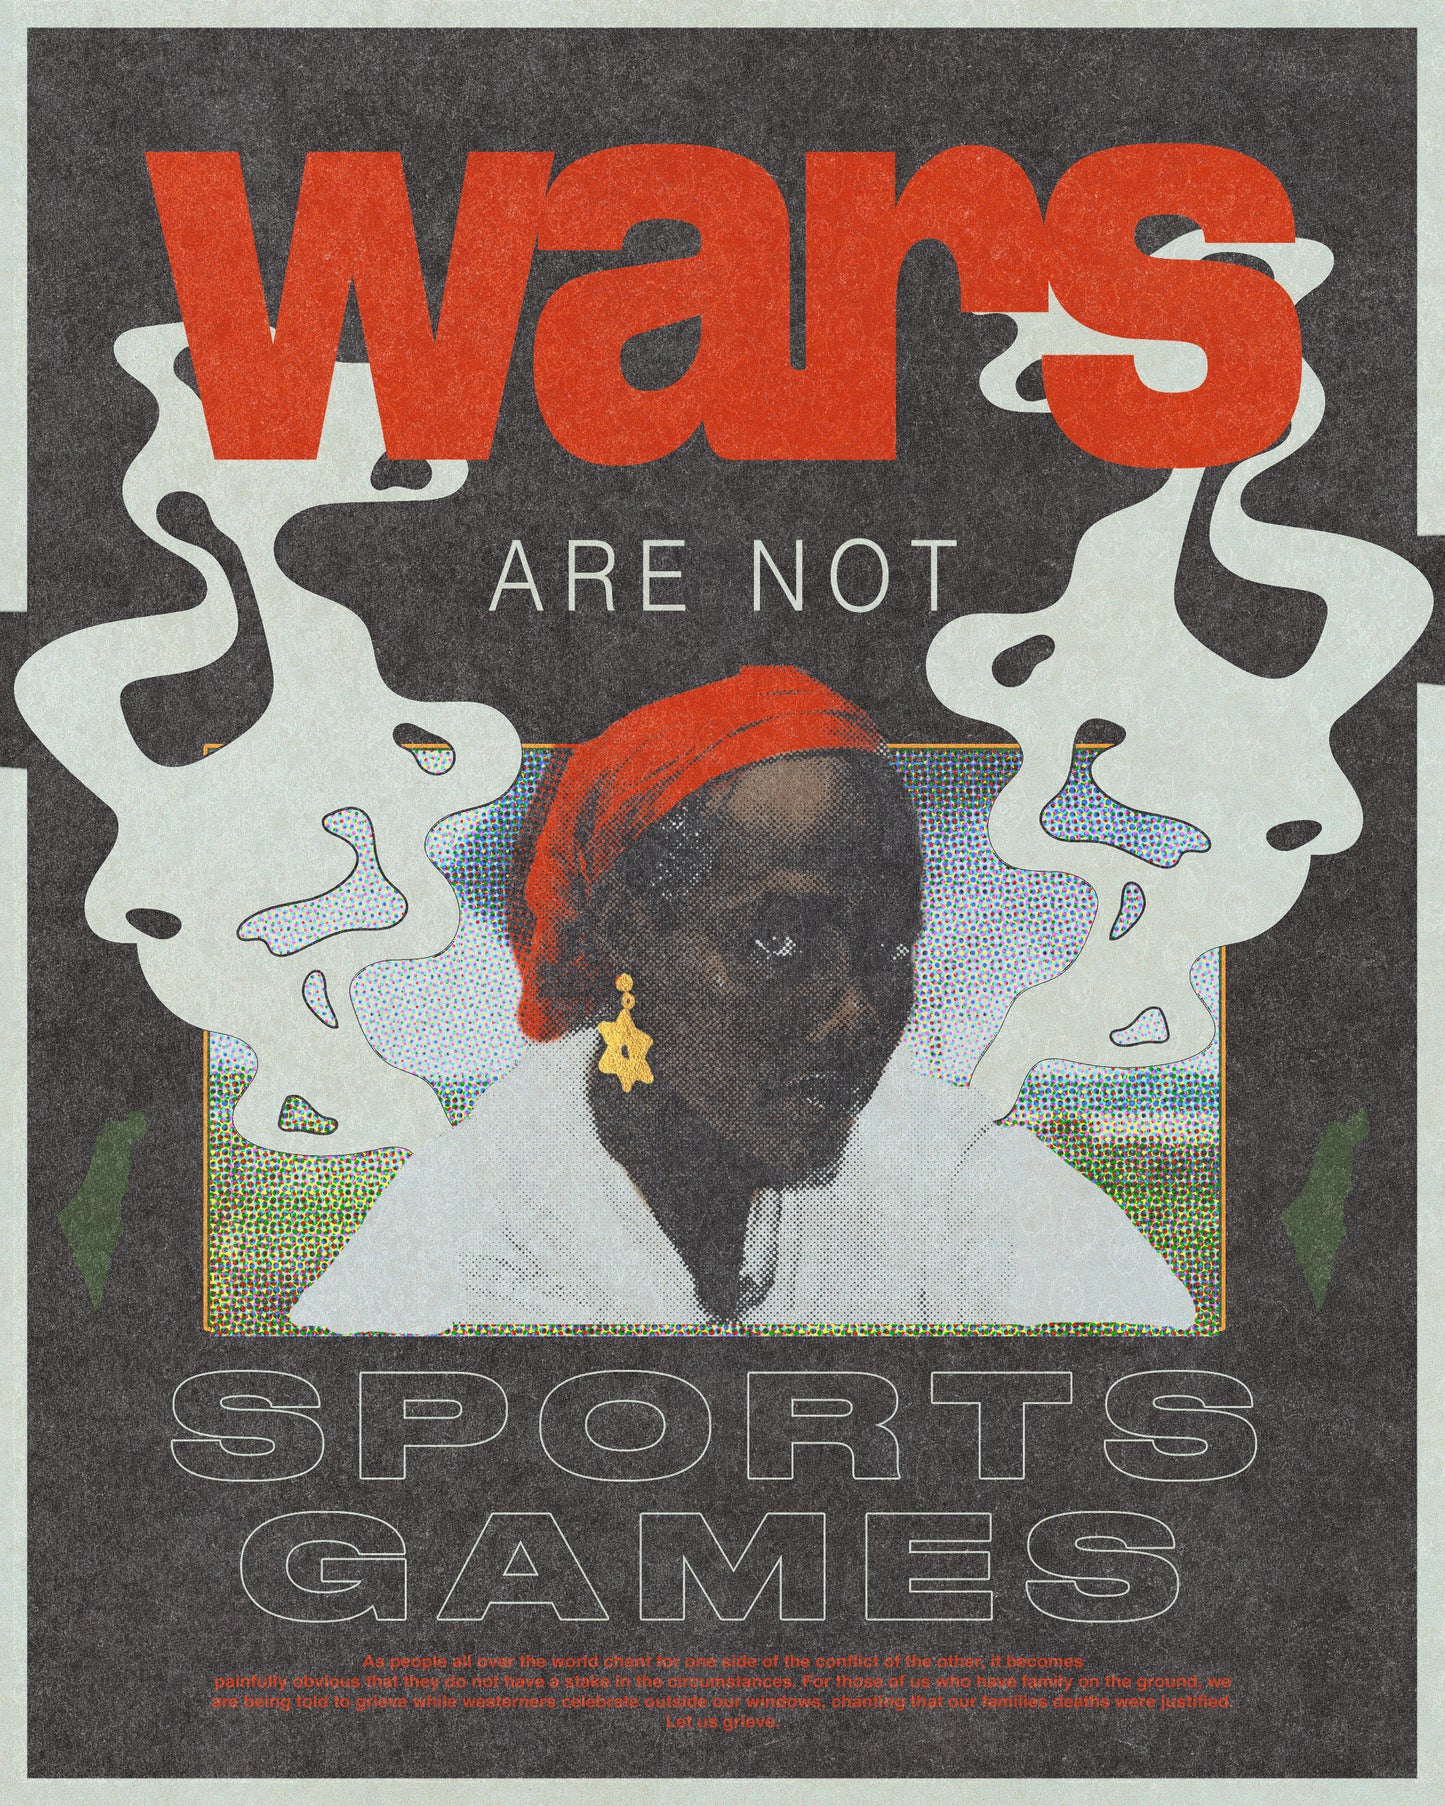 FREE PRINTABLE: "WAR IS NOT A SPORTSGAME"